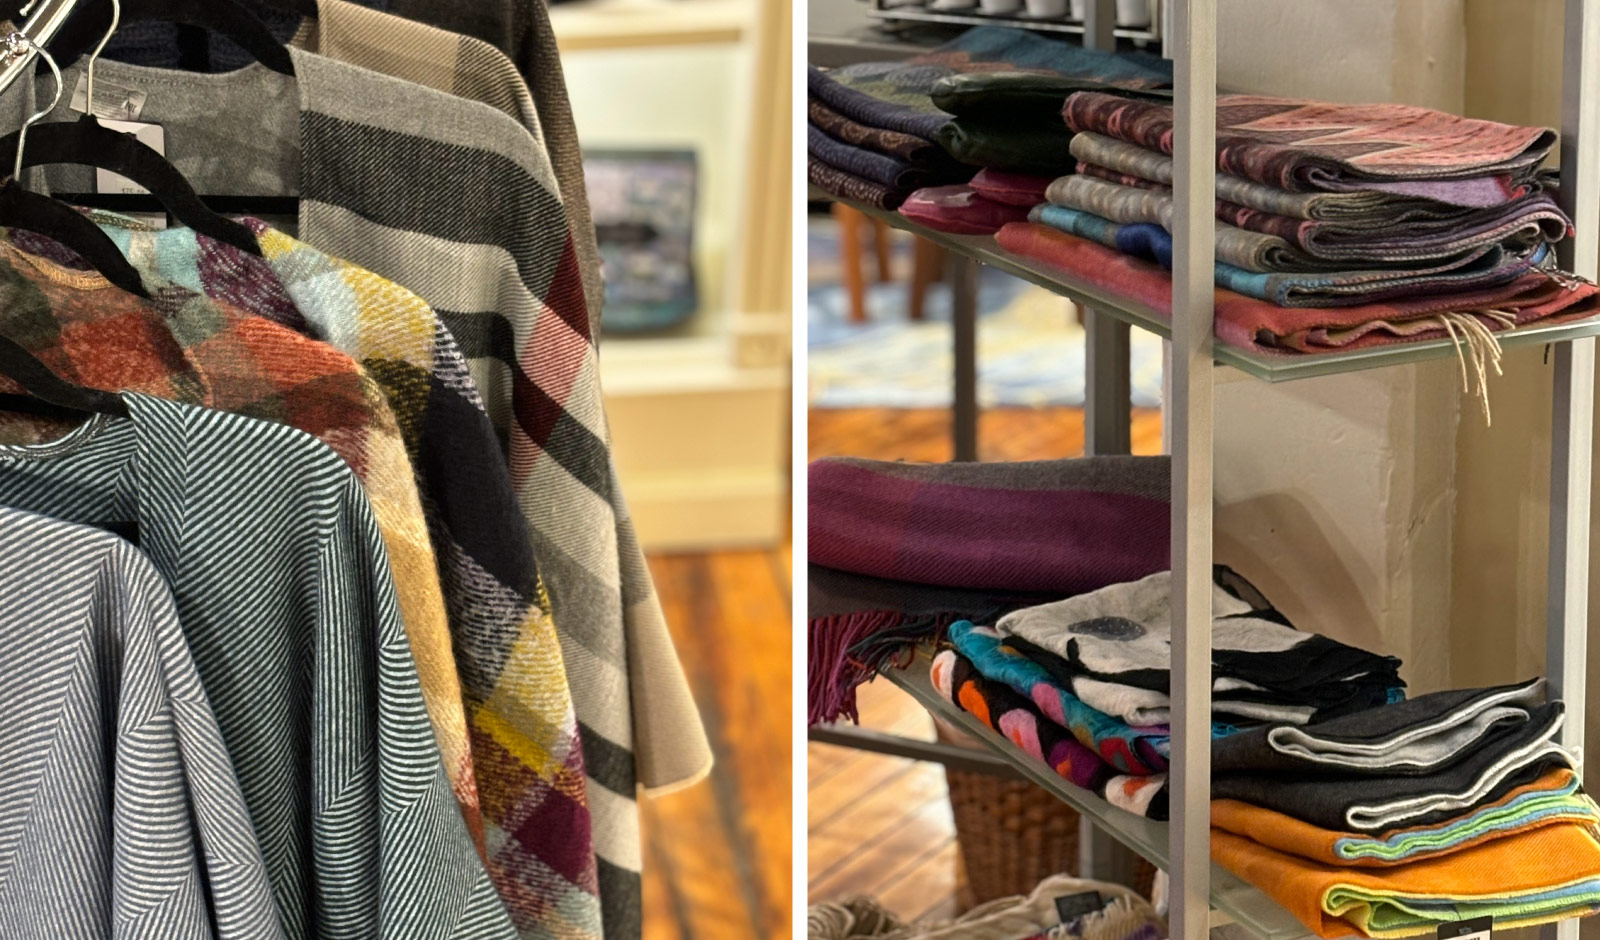 A rack of woven capes in plaid designs | A shelf of scarves in many patterns and colors